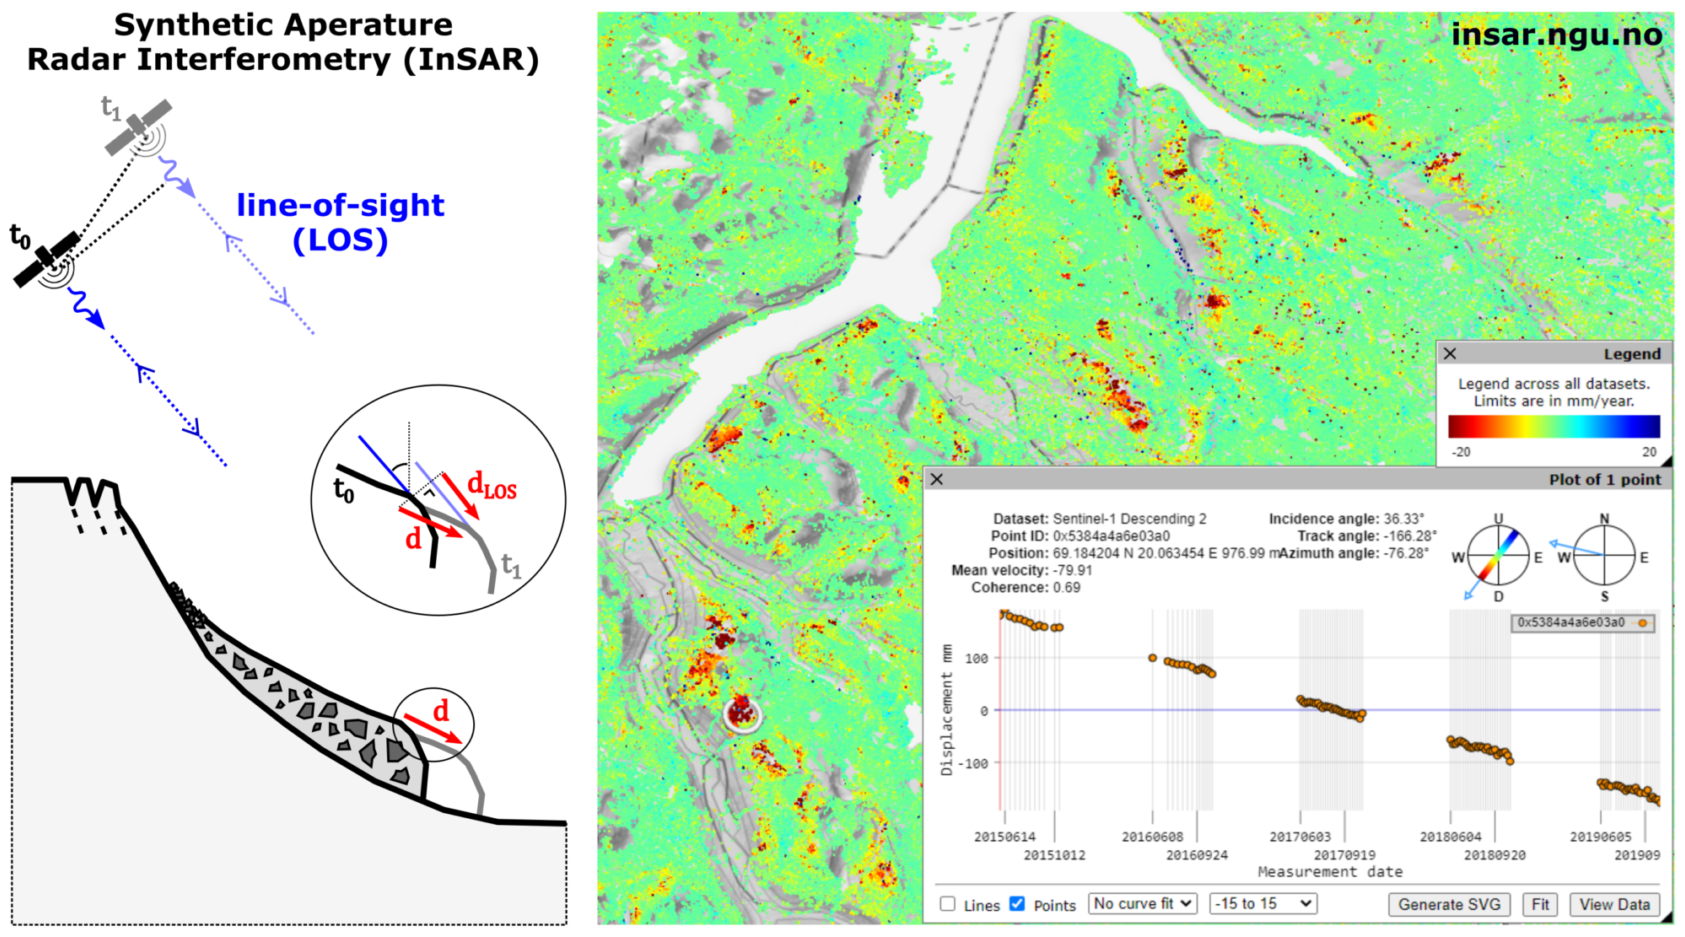 , Figure 1. Synthetic Aperture Radar Interferometry (InSAR) for measuring ground surface displacements of gradually sliding/deforming rock slopes (landslides and creeping permafrost landforms)., Figure1, , 